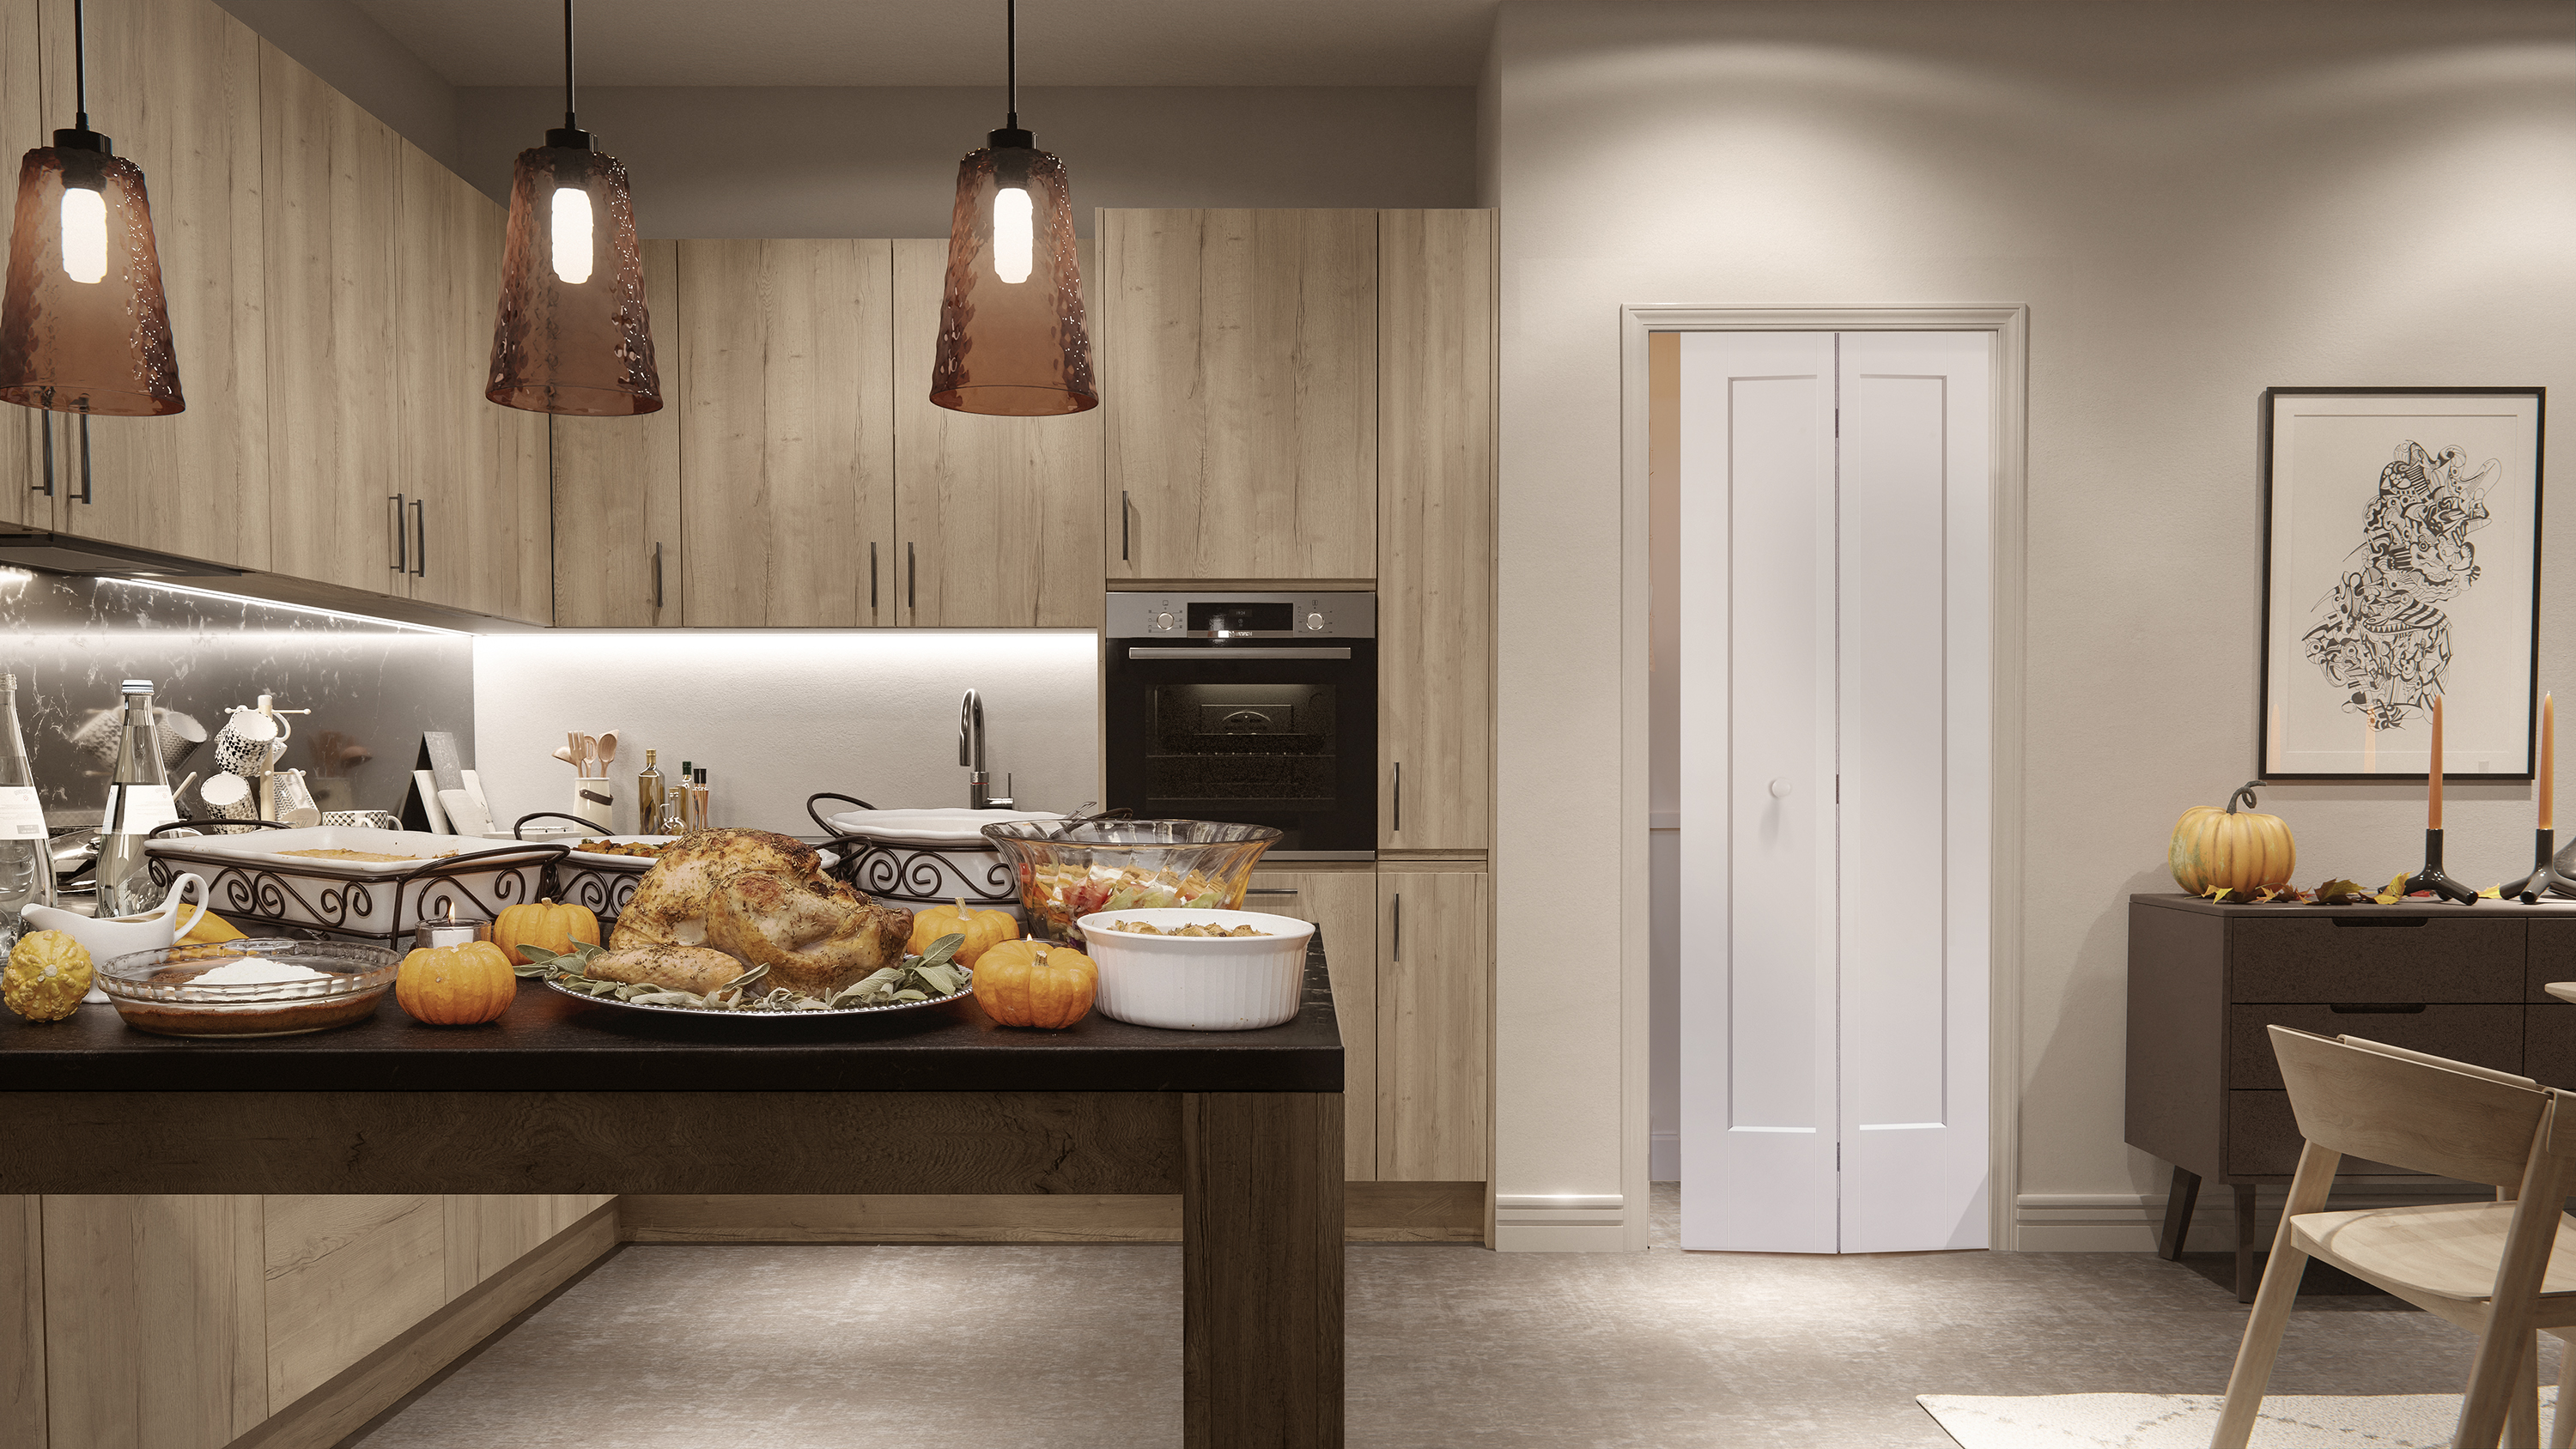 A modern kitchen with wood-stained cabinets, a spread of food that includes a large turkey, and a white bifold pantry door